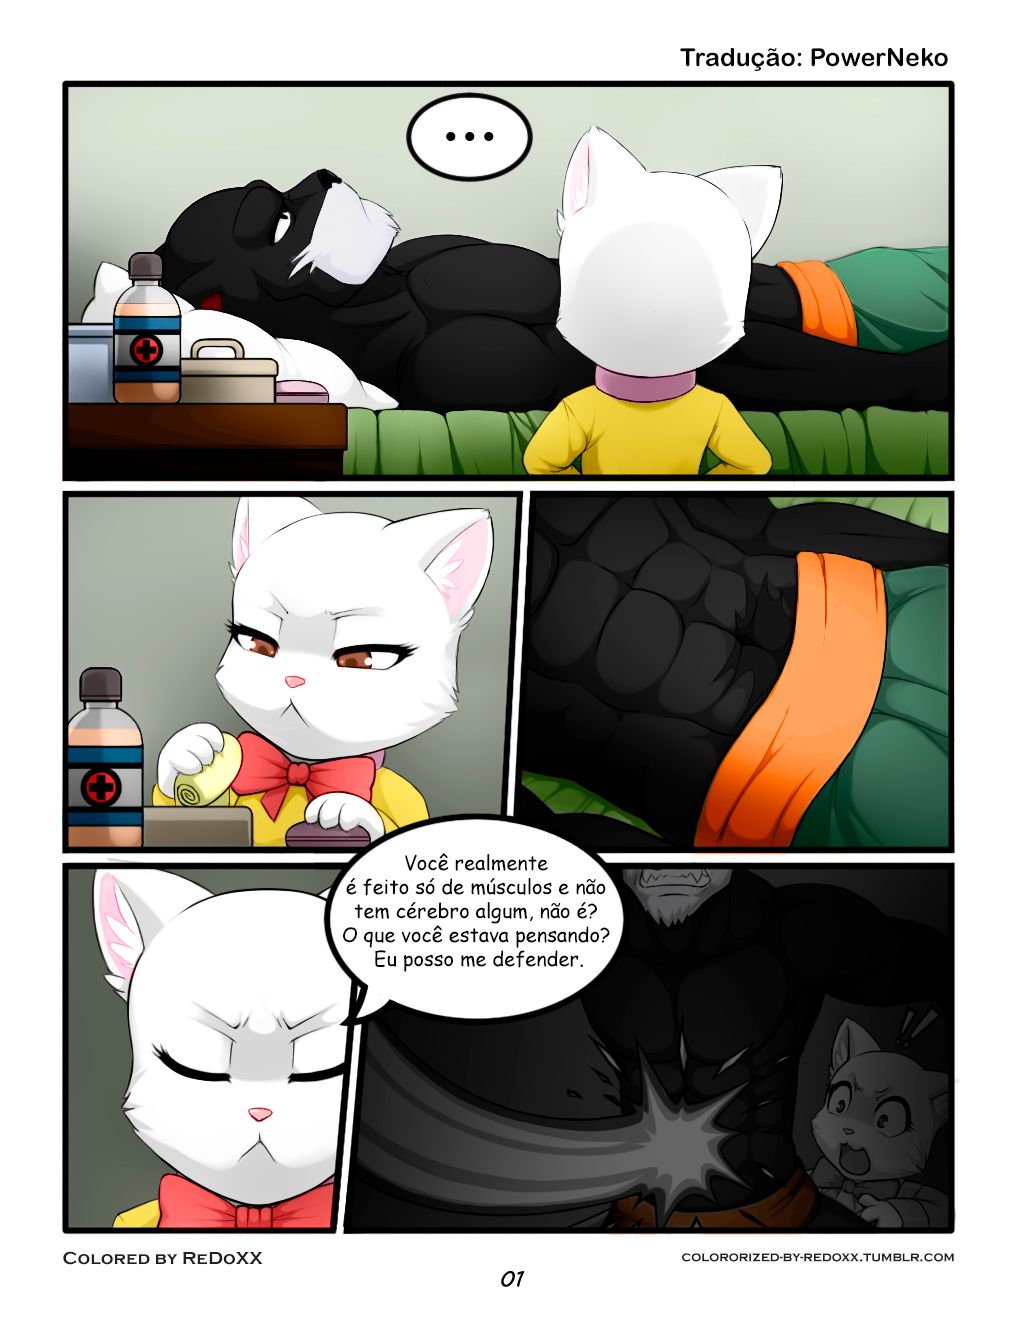 [Darkmirage]Size Counts (O Tamanho Importa) [Colorized by ReDoXX] [Portuguese-BR] [Translated by PowerNeko] 2